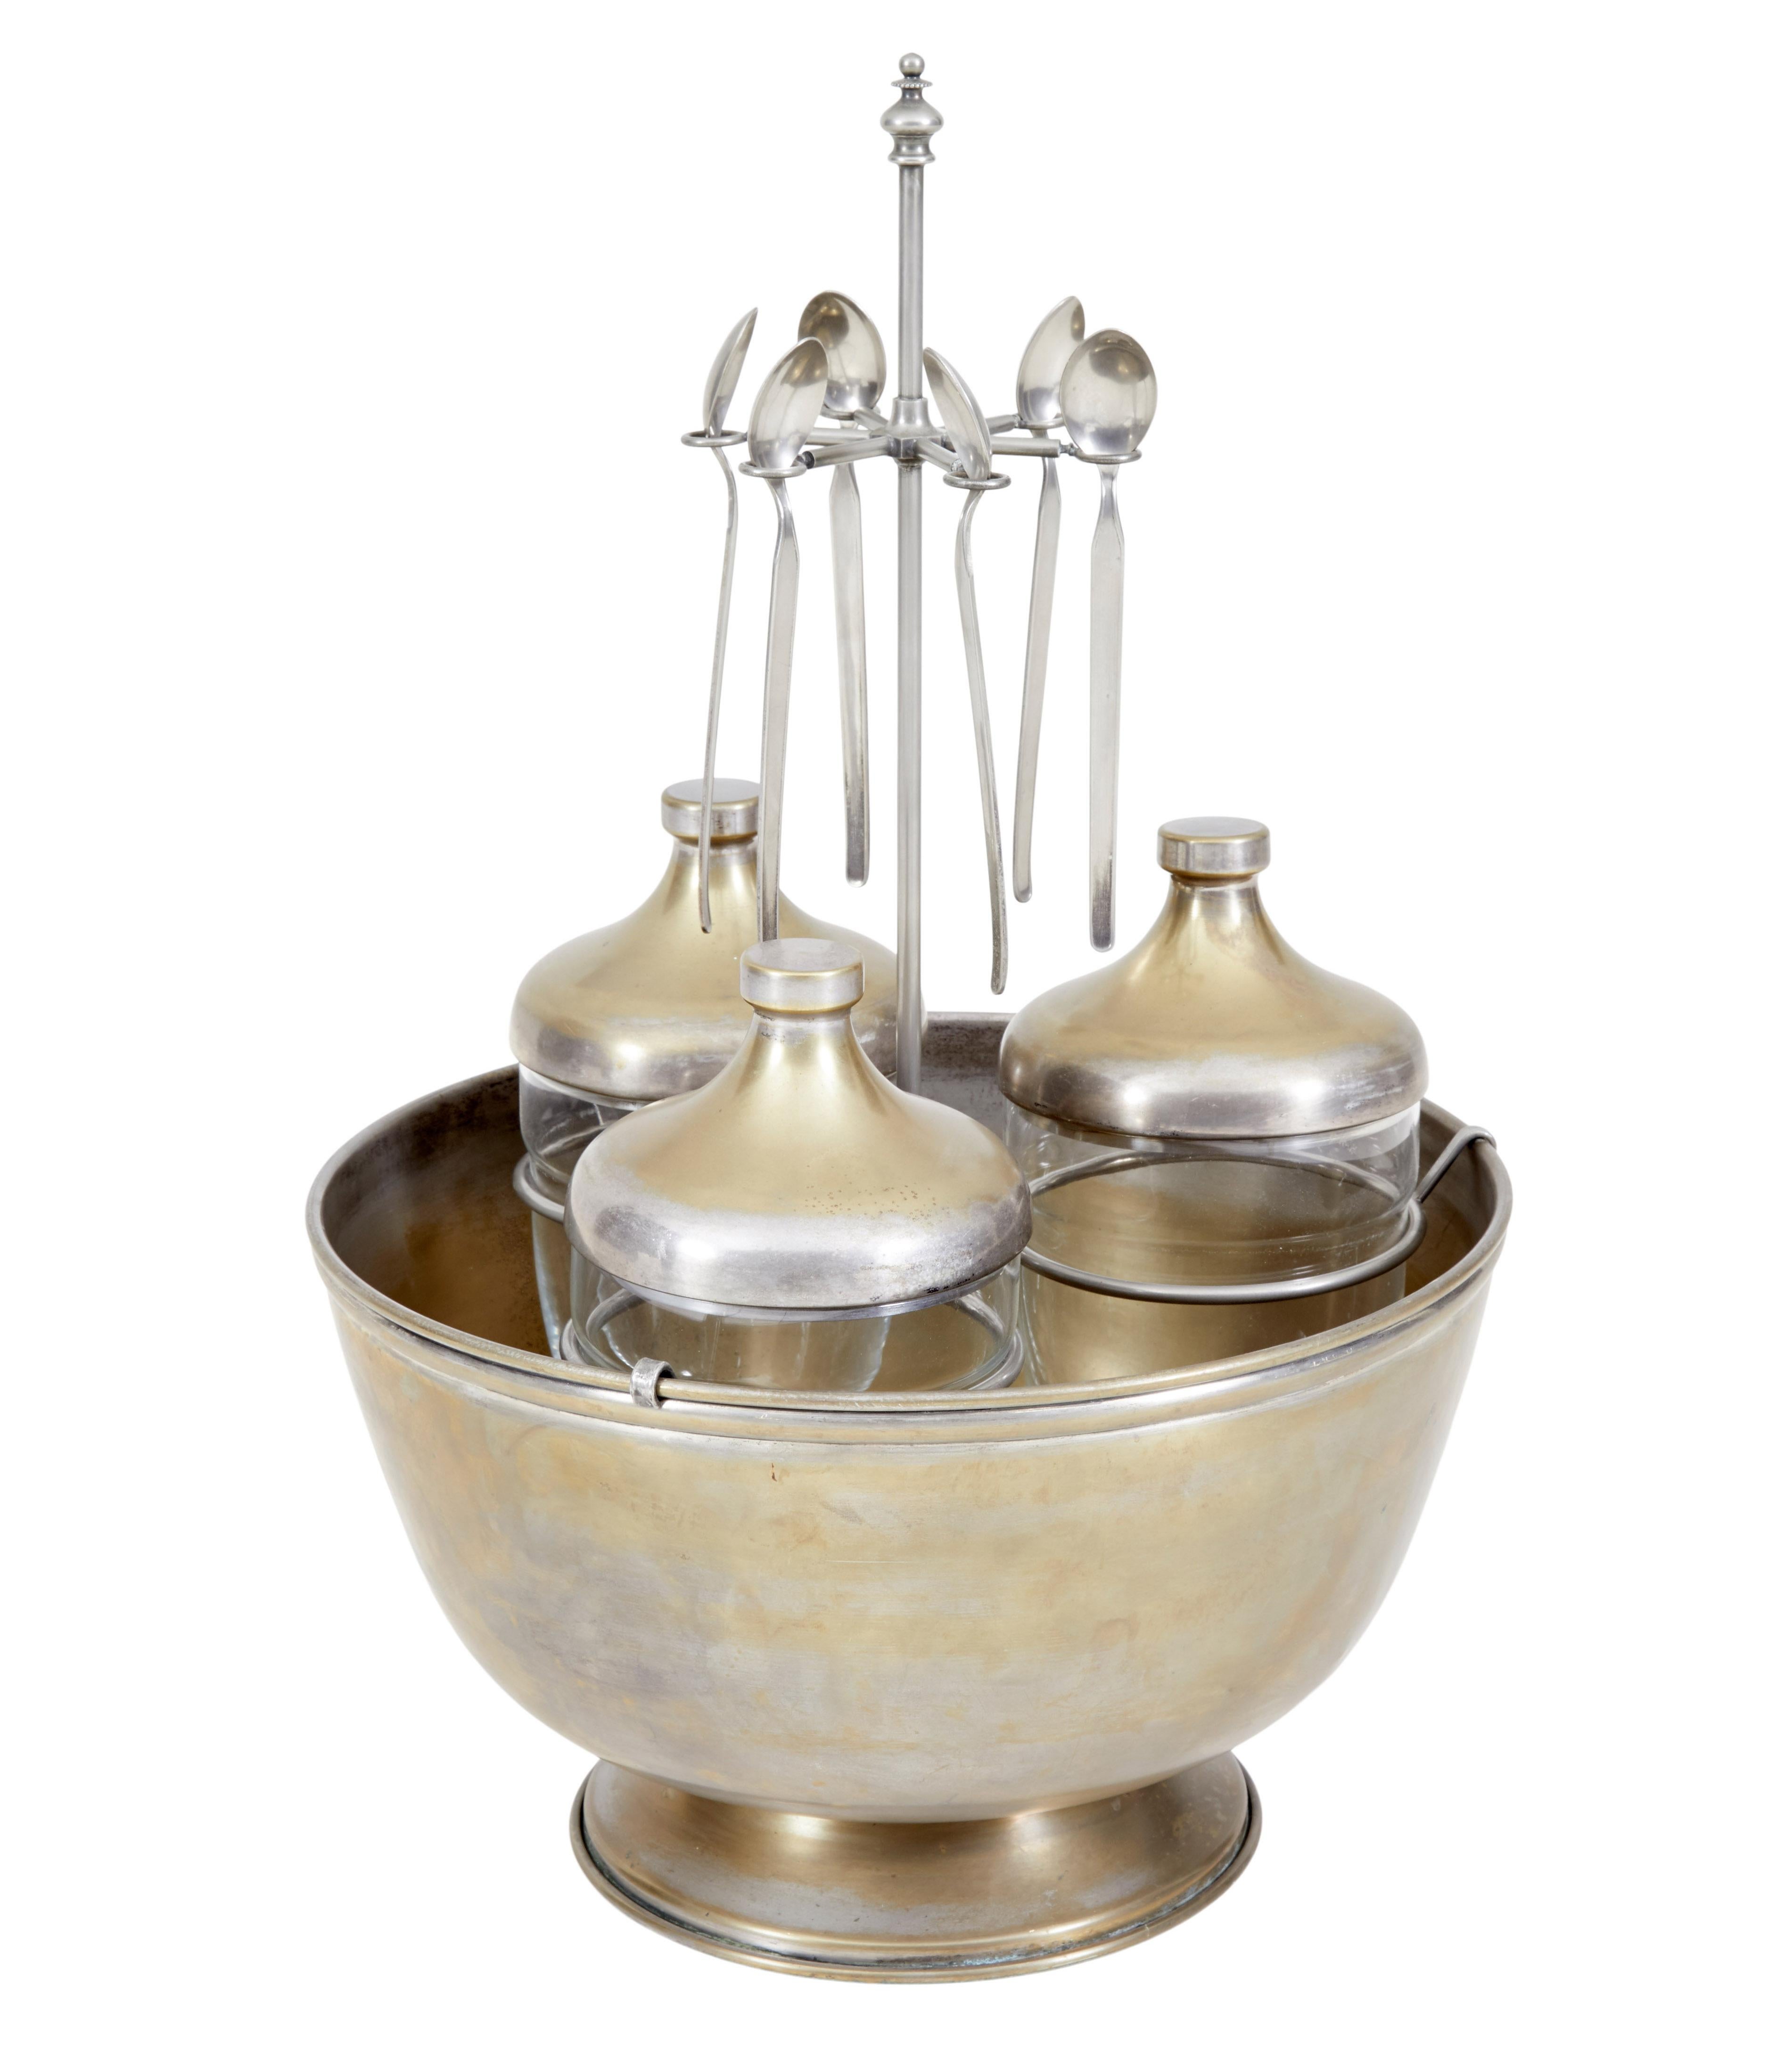 Interesting caviar set, circa 1920.

Comprising of four elements. Bowl, three jars with lids, holding rack and spoons.

Made from steel and gilded which has mostly worn away. The steel holder keeps the glass jars elevated and holds 6 spoons,